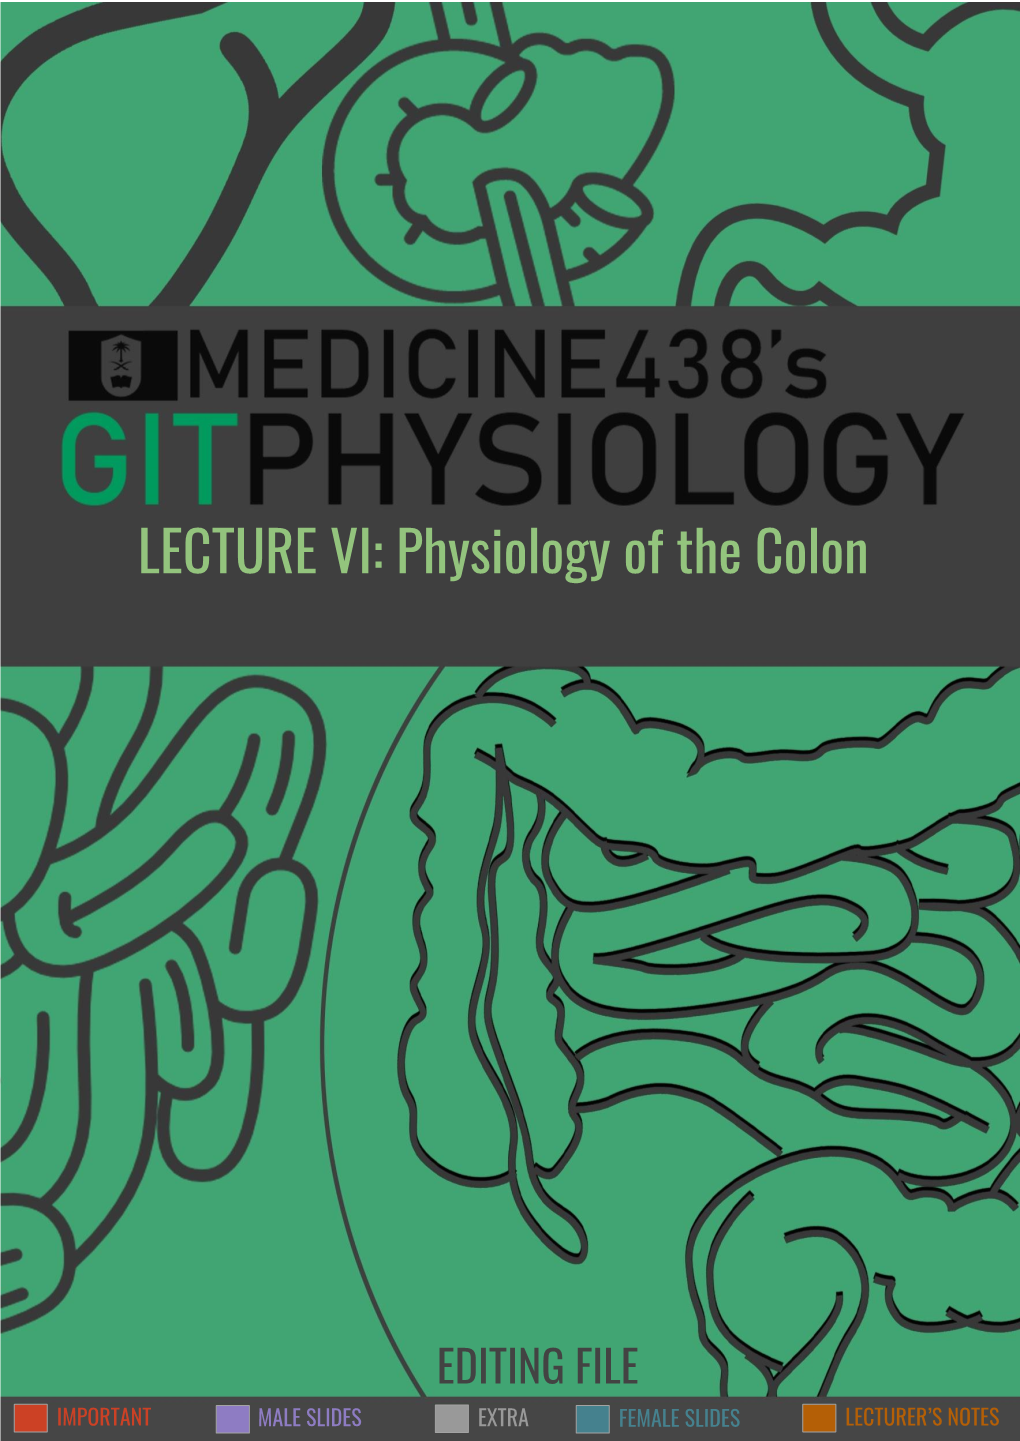 Physiology of the Colon